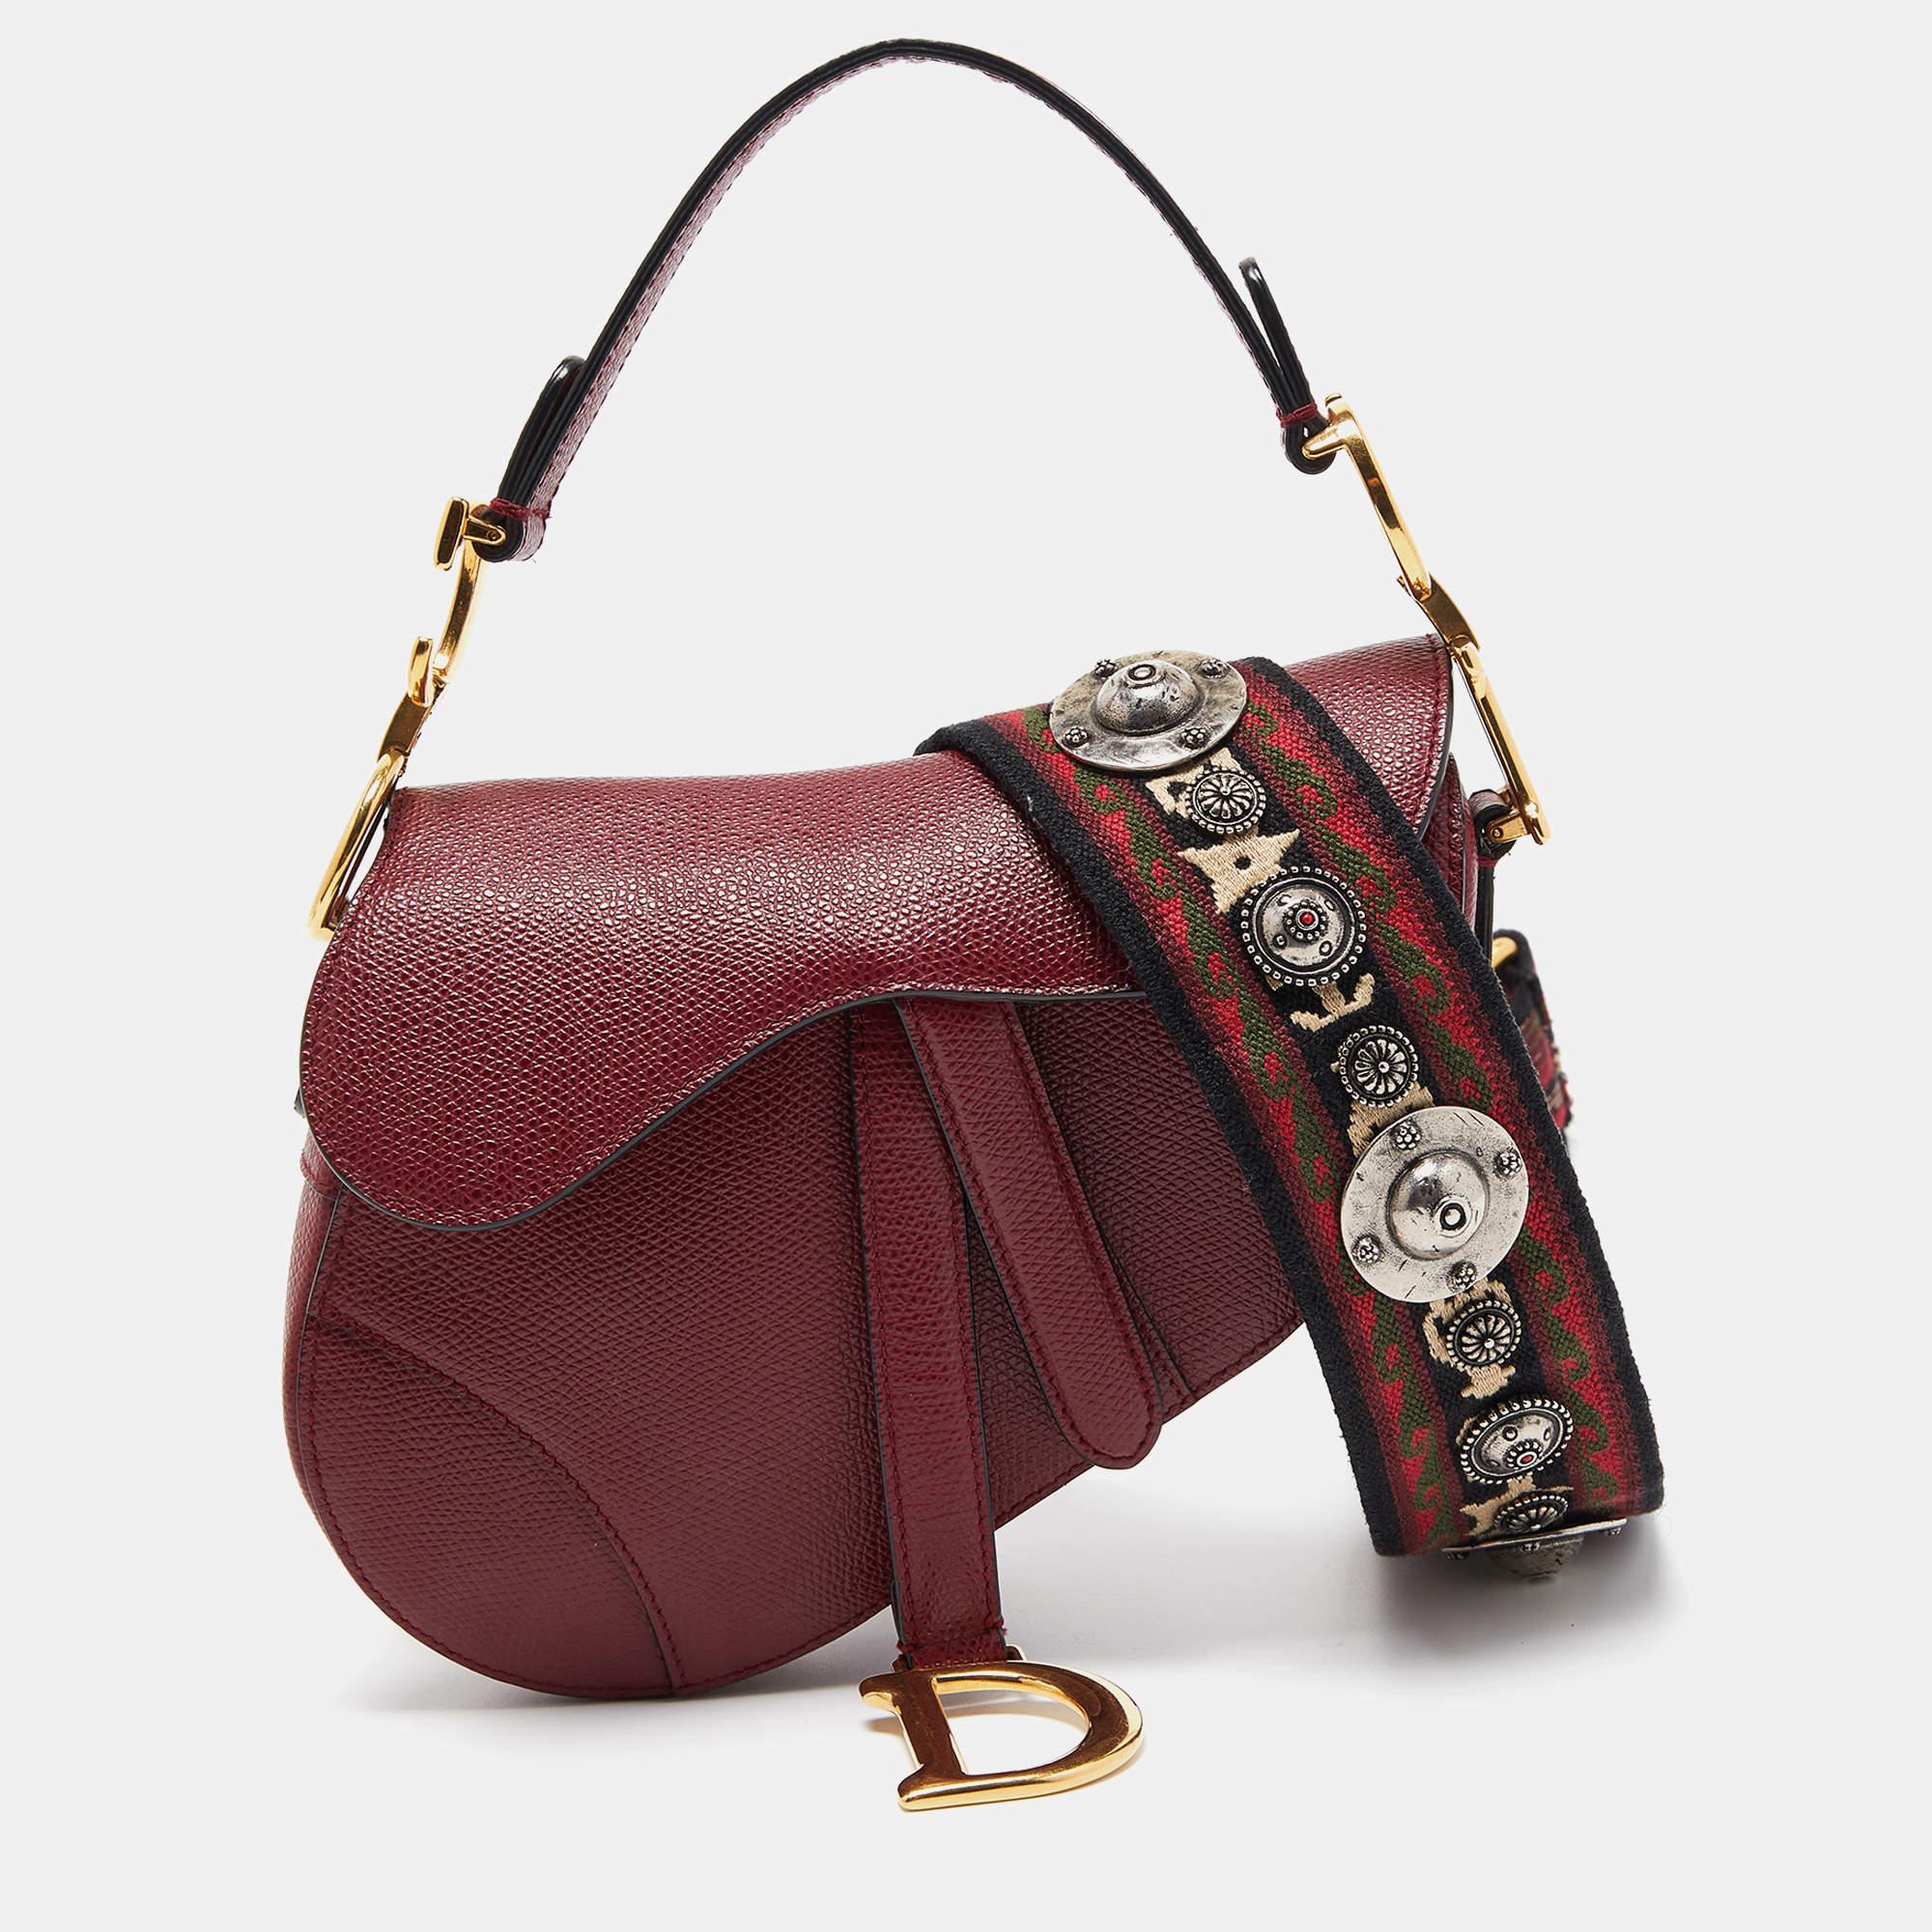 The Dior saddle bag is a chic accessory that epitomizes elegance. Crafted from luxurious red leather, it features the iconic saddle shape, a compact size, and the signature Dior logo. A perfect blend of style and sophistication.

